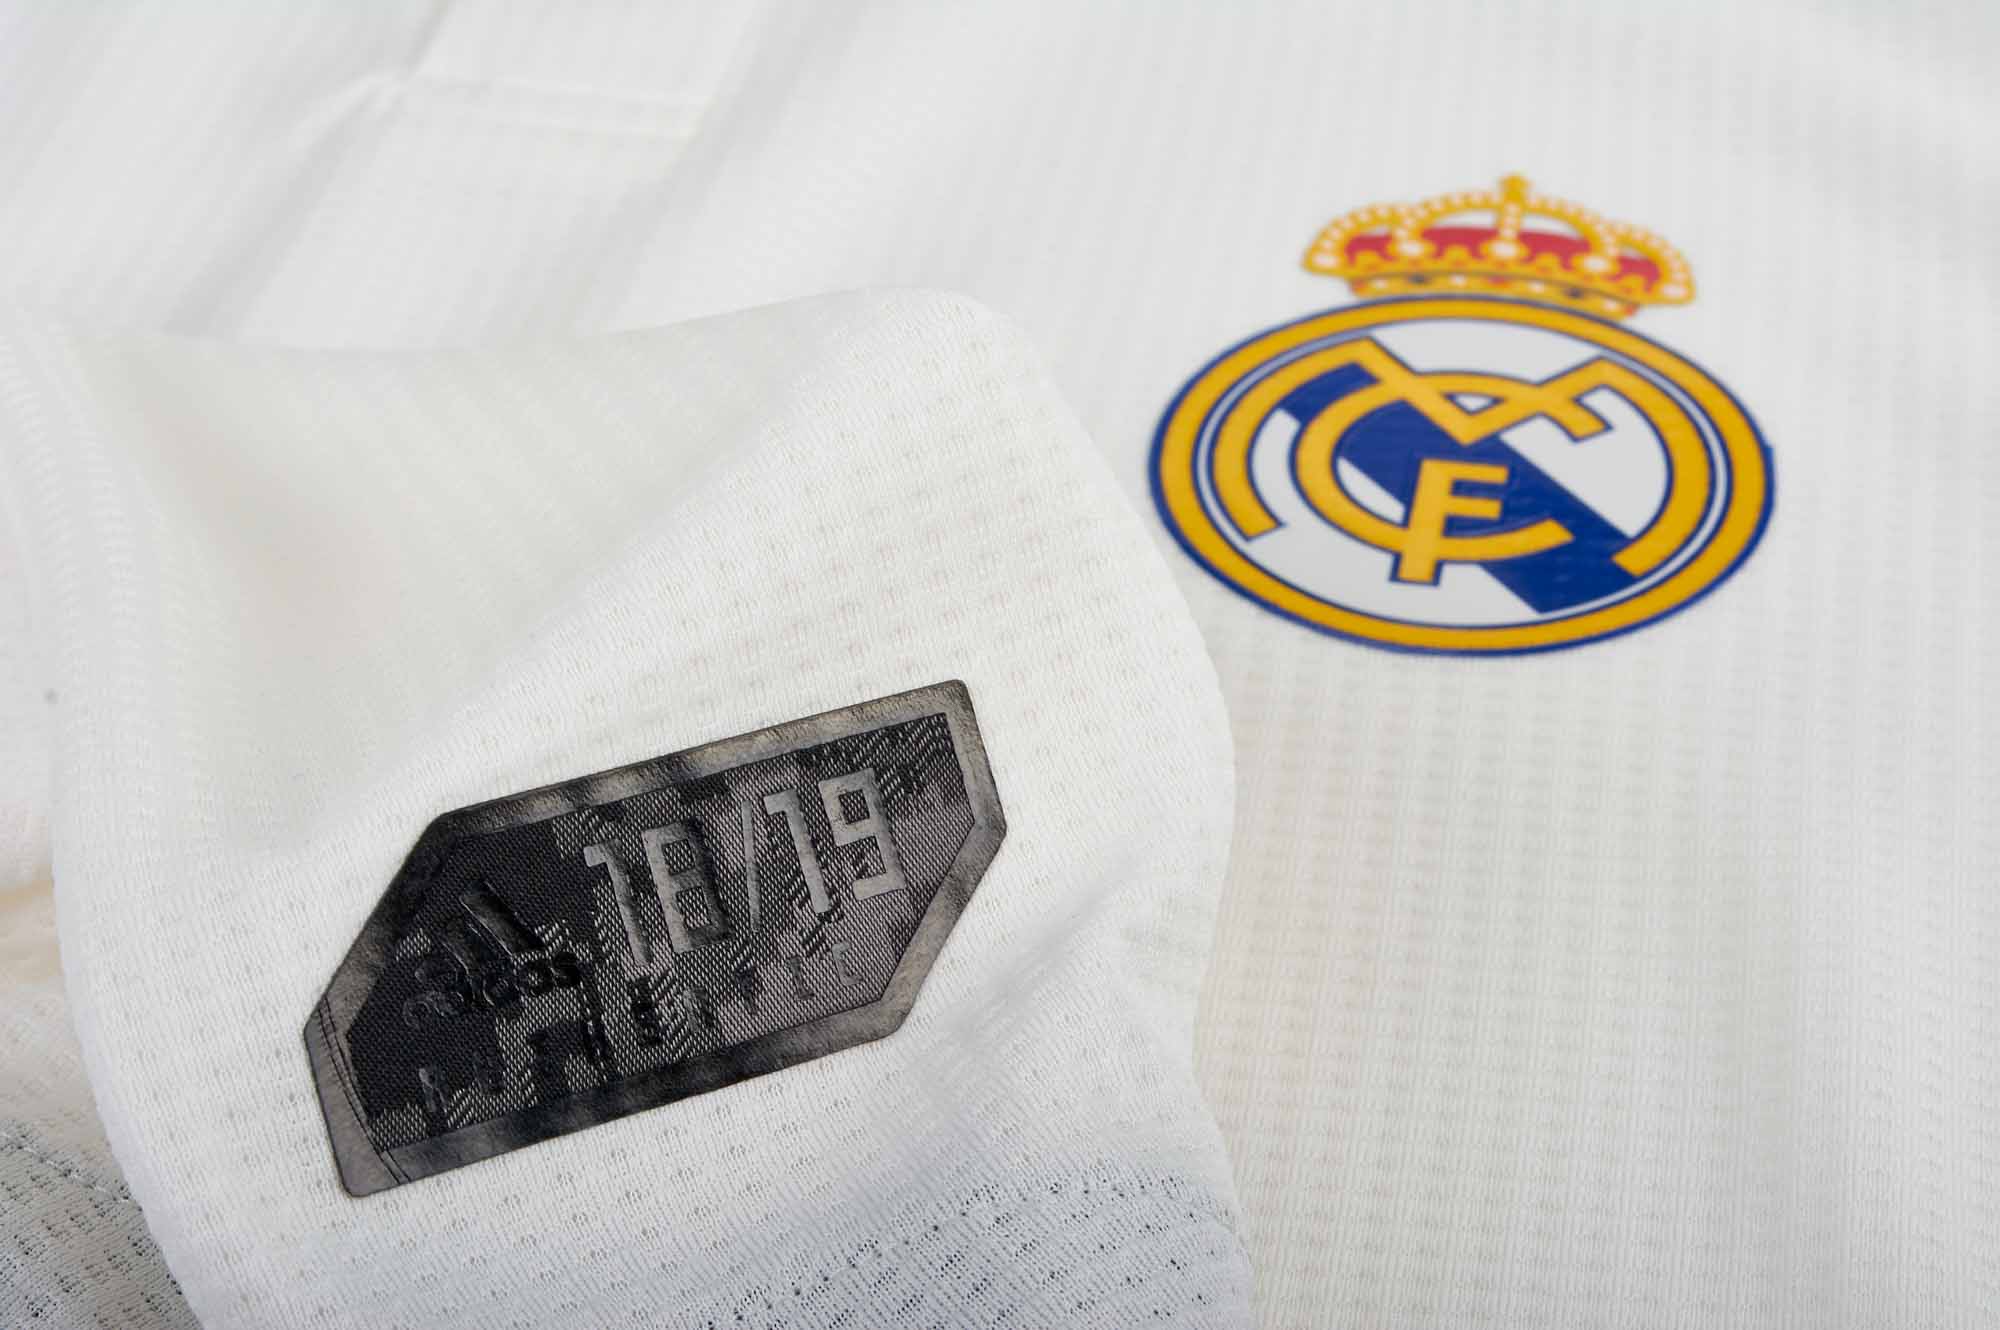 Adidas Real Madrid 2018 Logo - adidas Real Madrid Home Authentic Jersey 2018-19 - SoccerPro